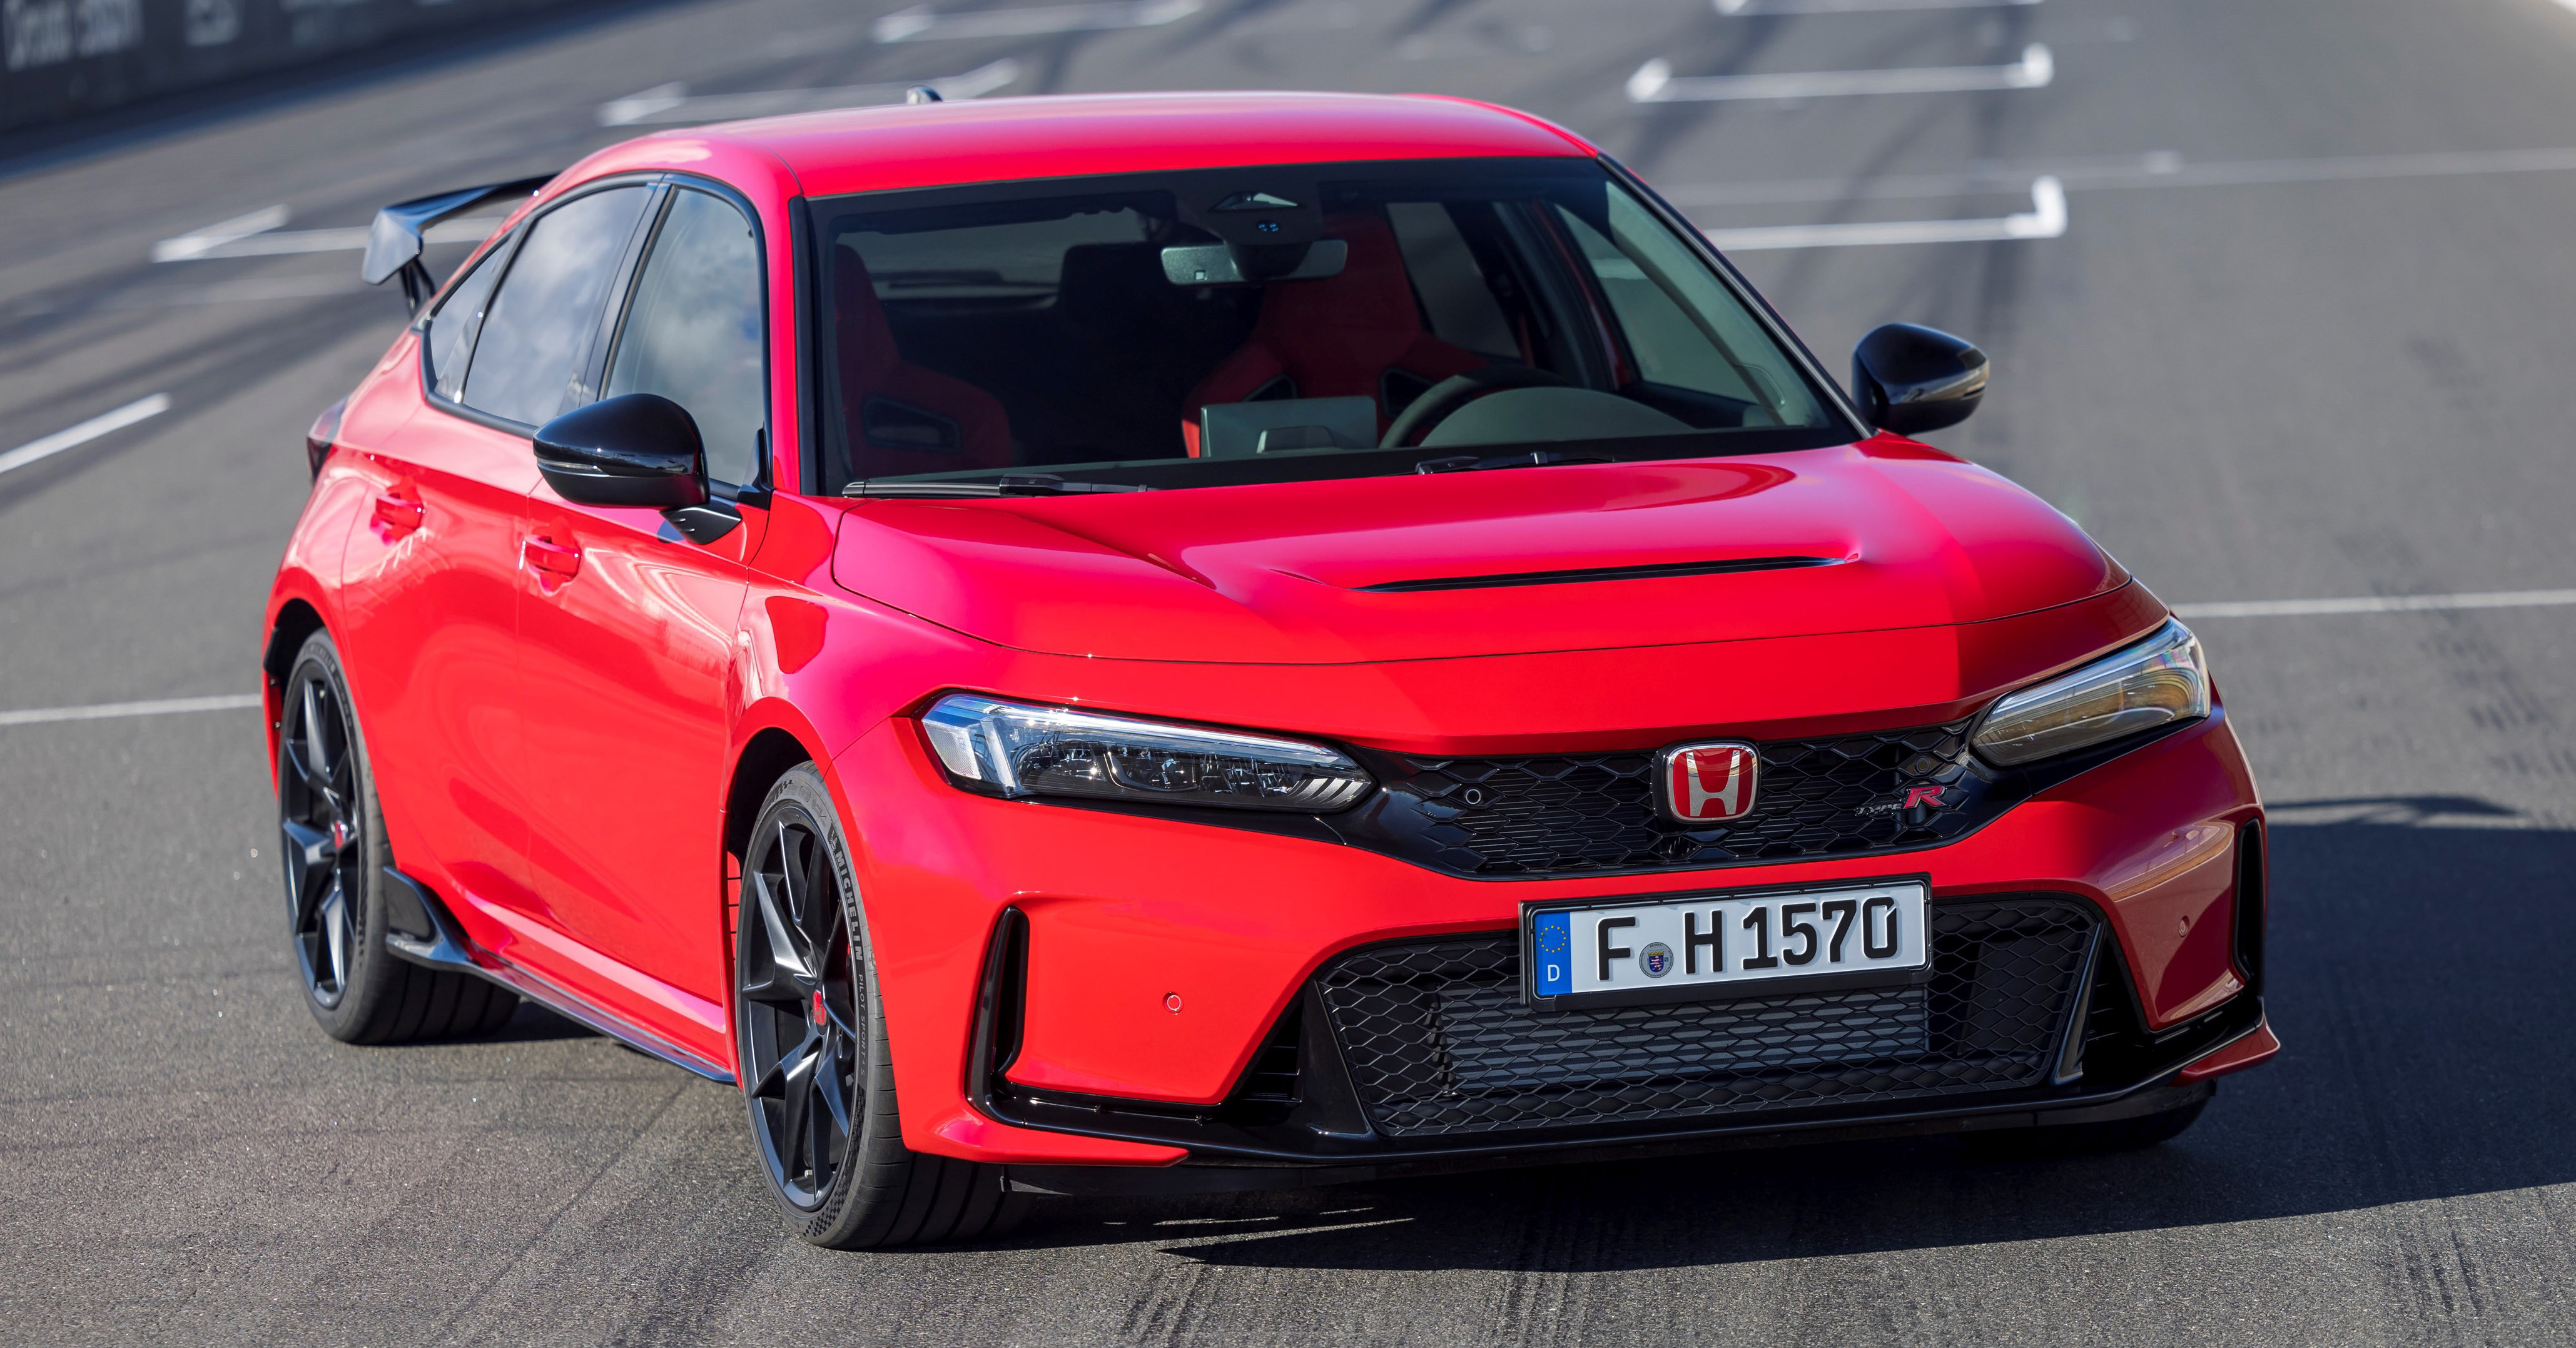 2024 Honda Civic Type R Review, Pricing, New Civic Type R Hatchback Models